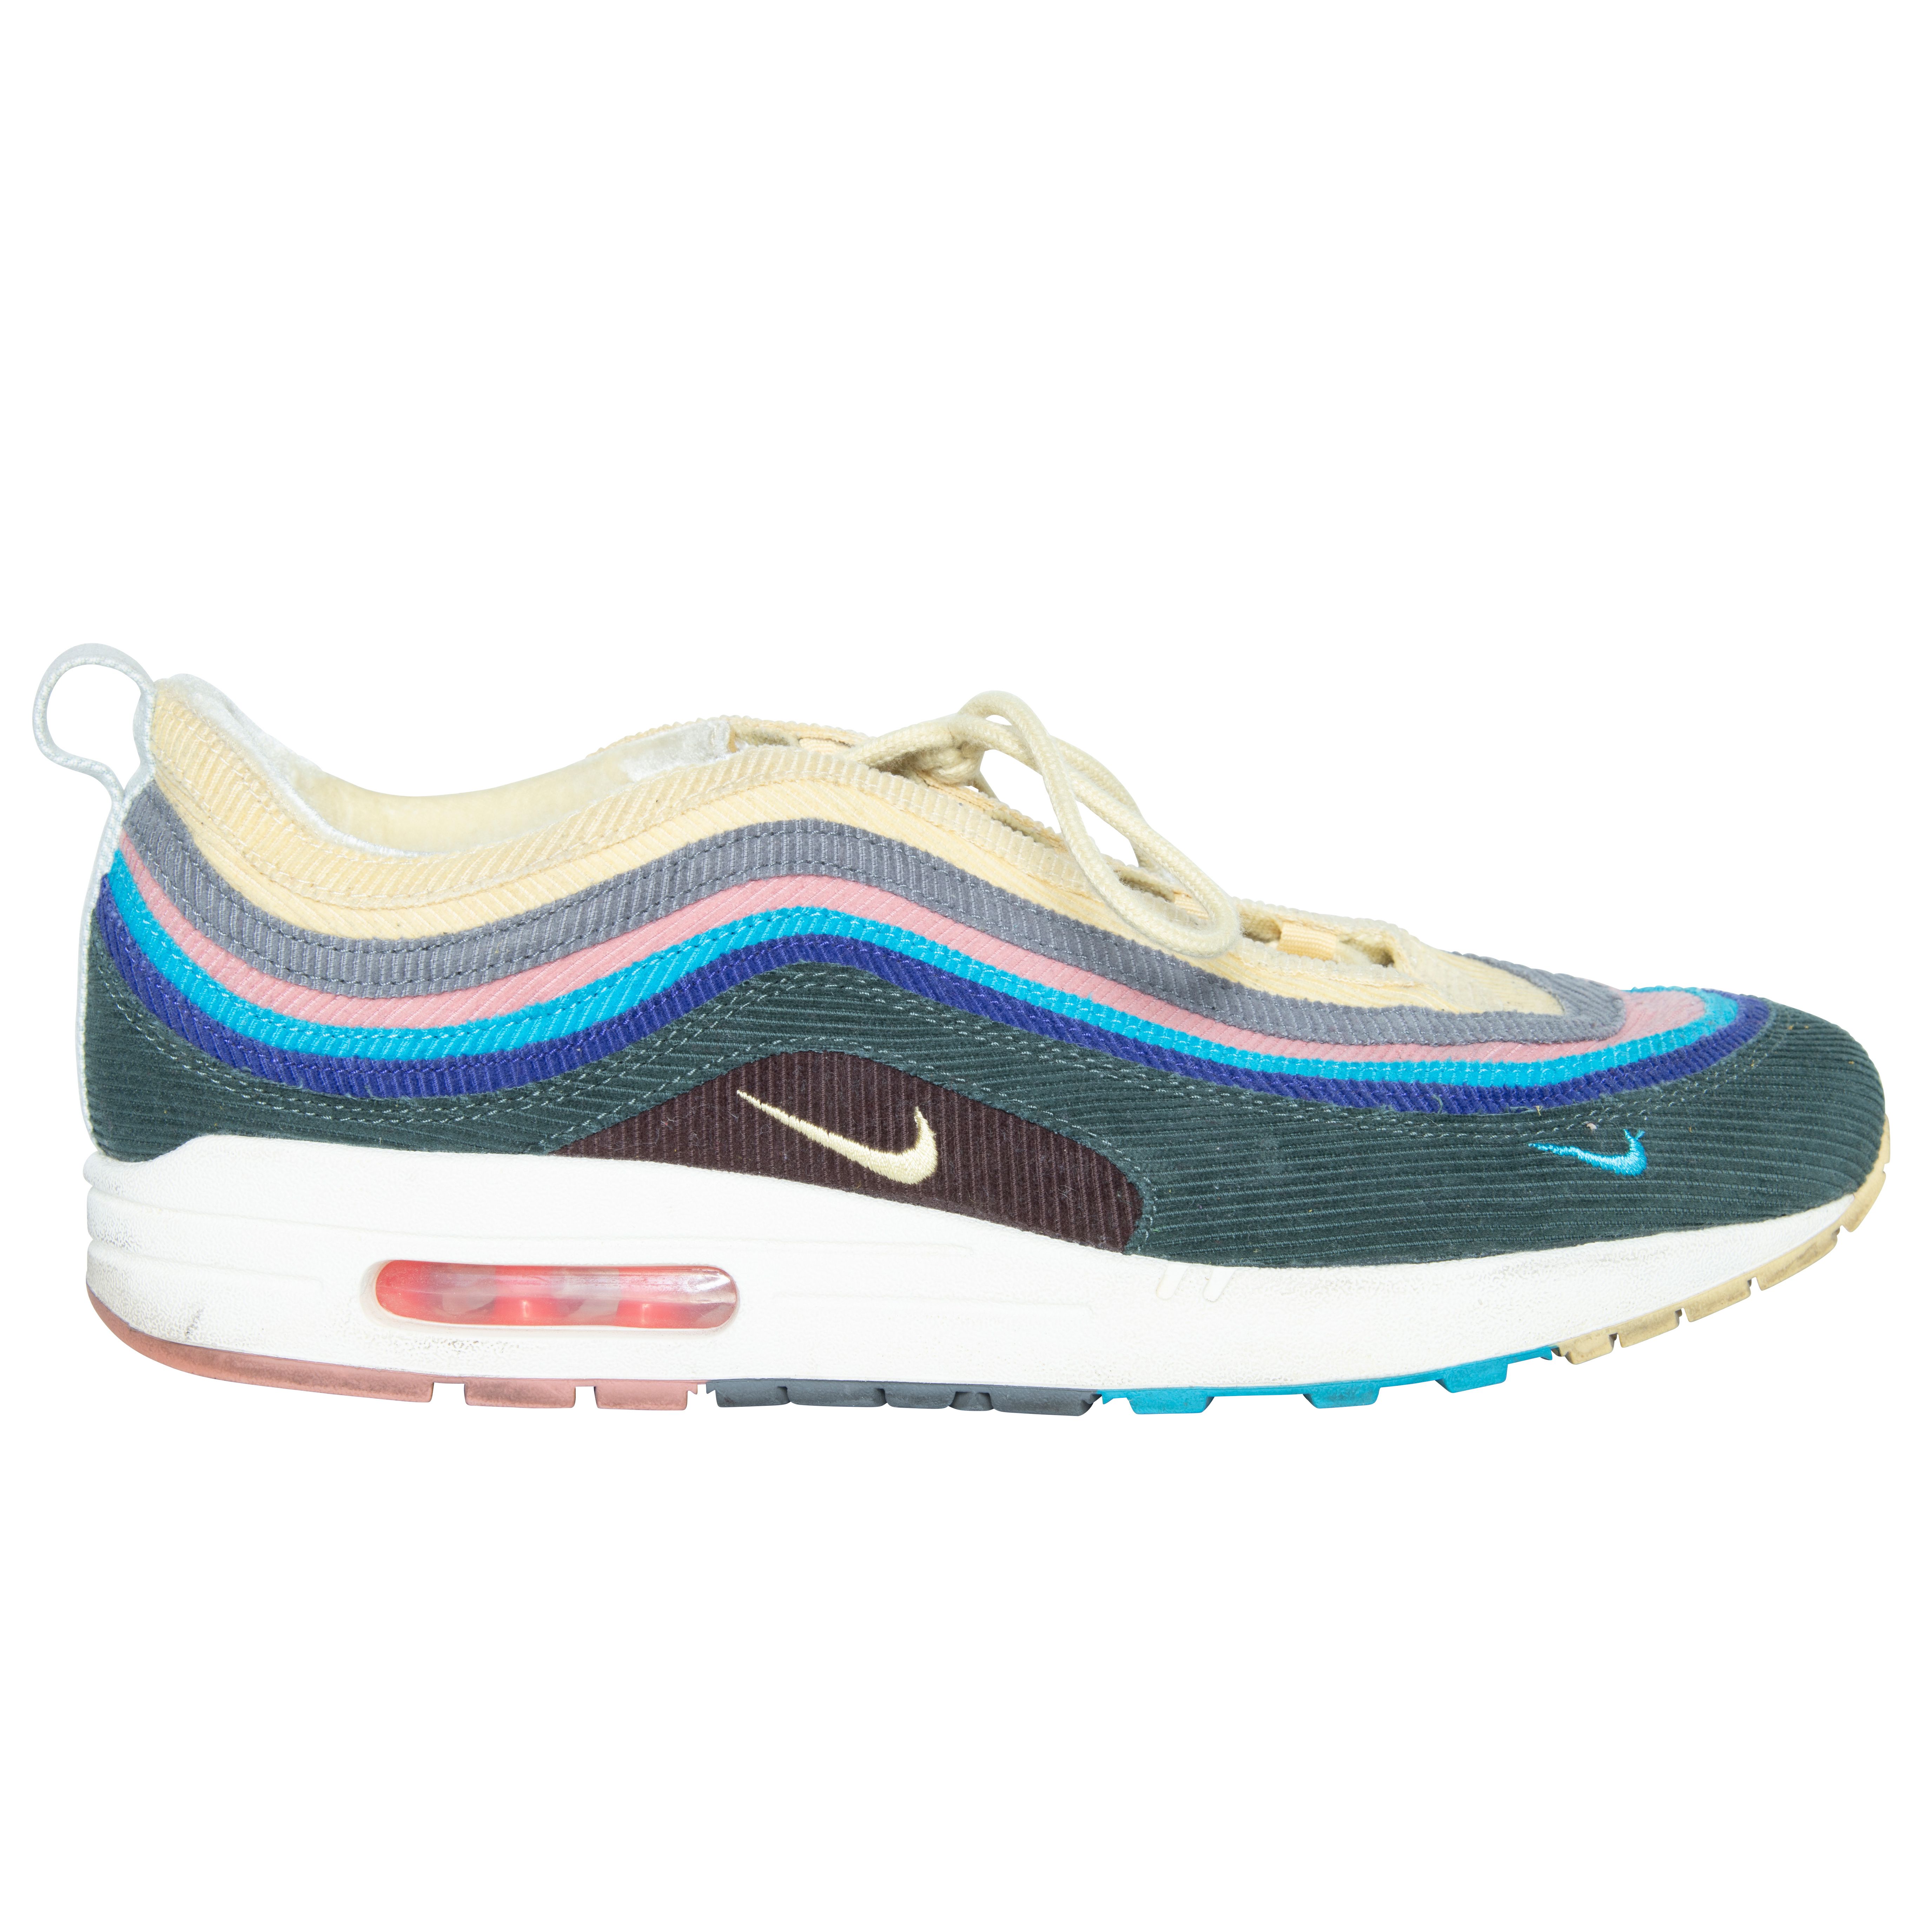 Nike x Sean Wotherspoon Air Max 1/97 by Kameron Casey | Basic.Space